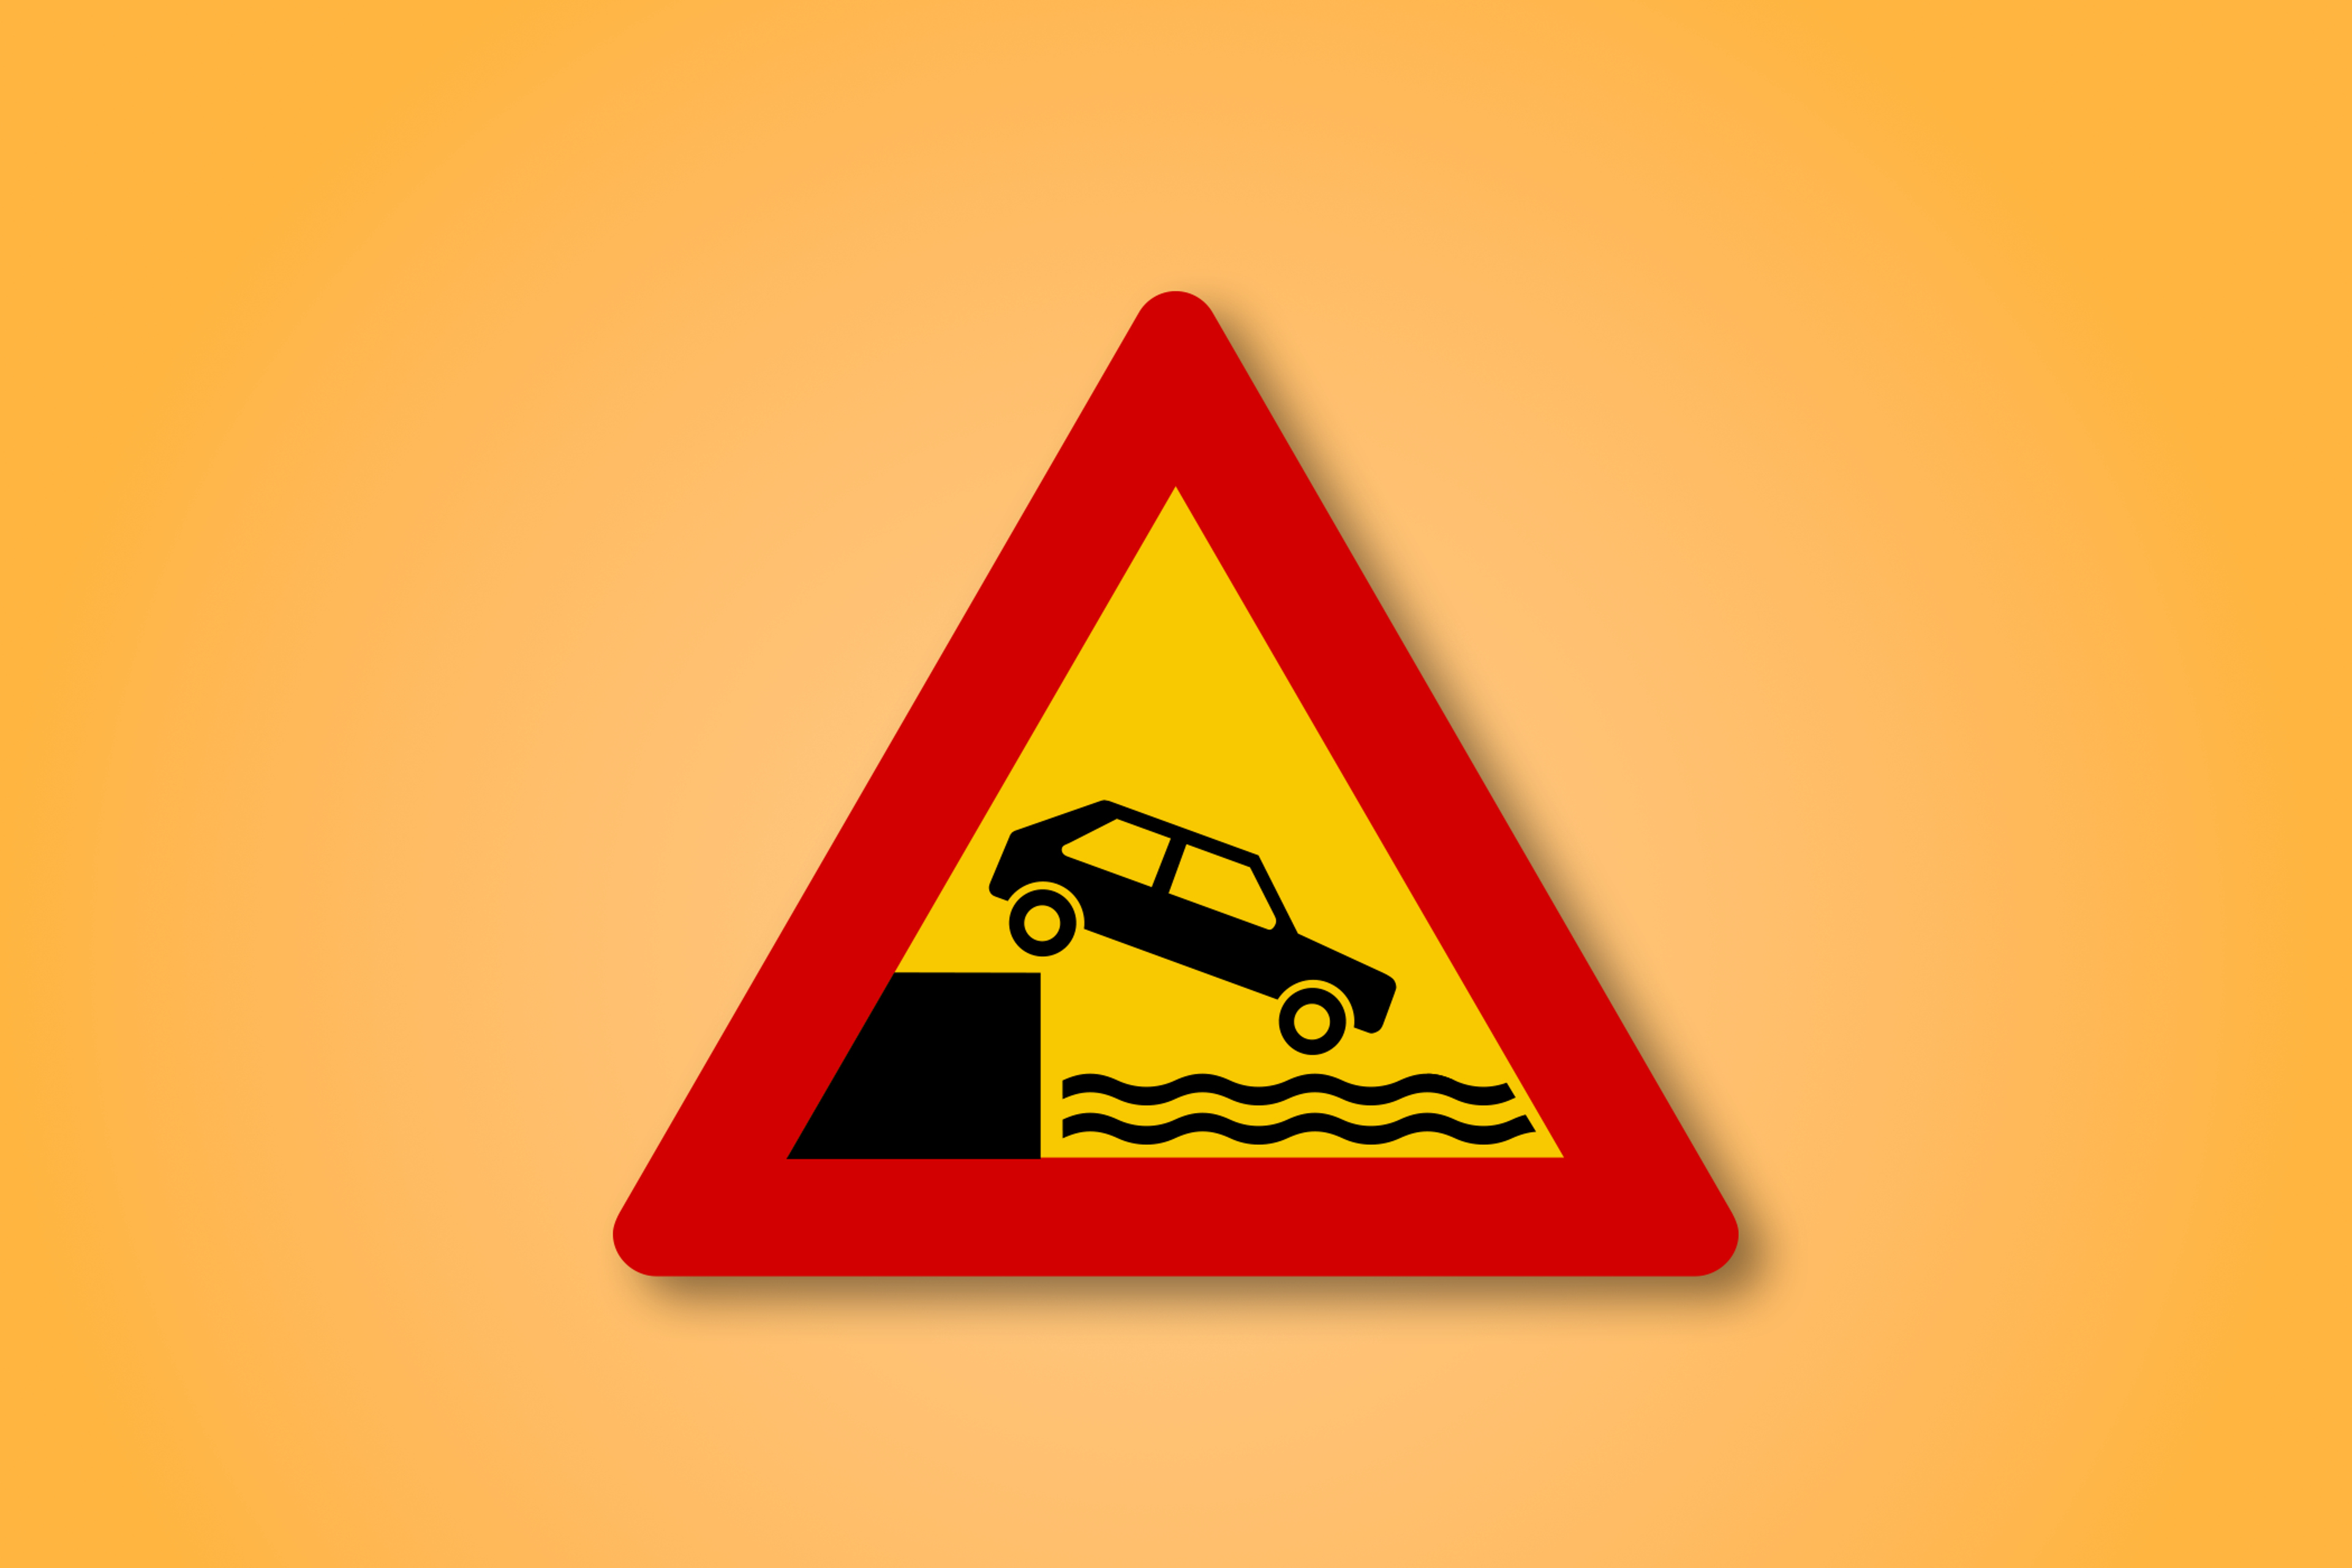 Red and yellow triangle road sign with a rental car in the middle. This road sign means Riverbank Ahead